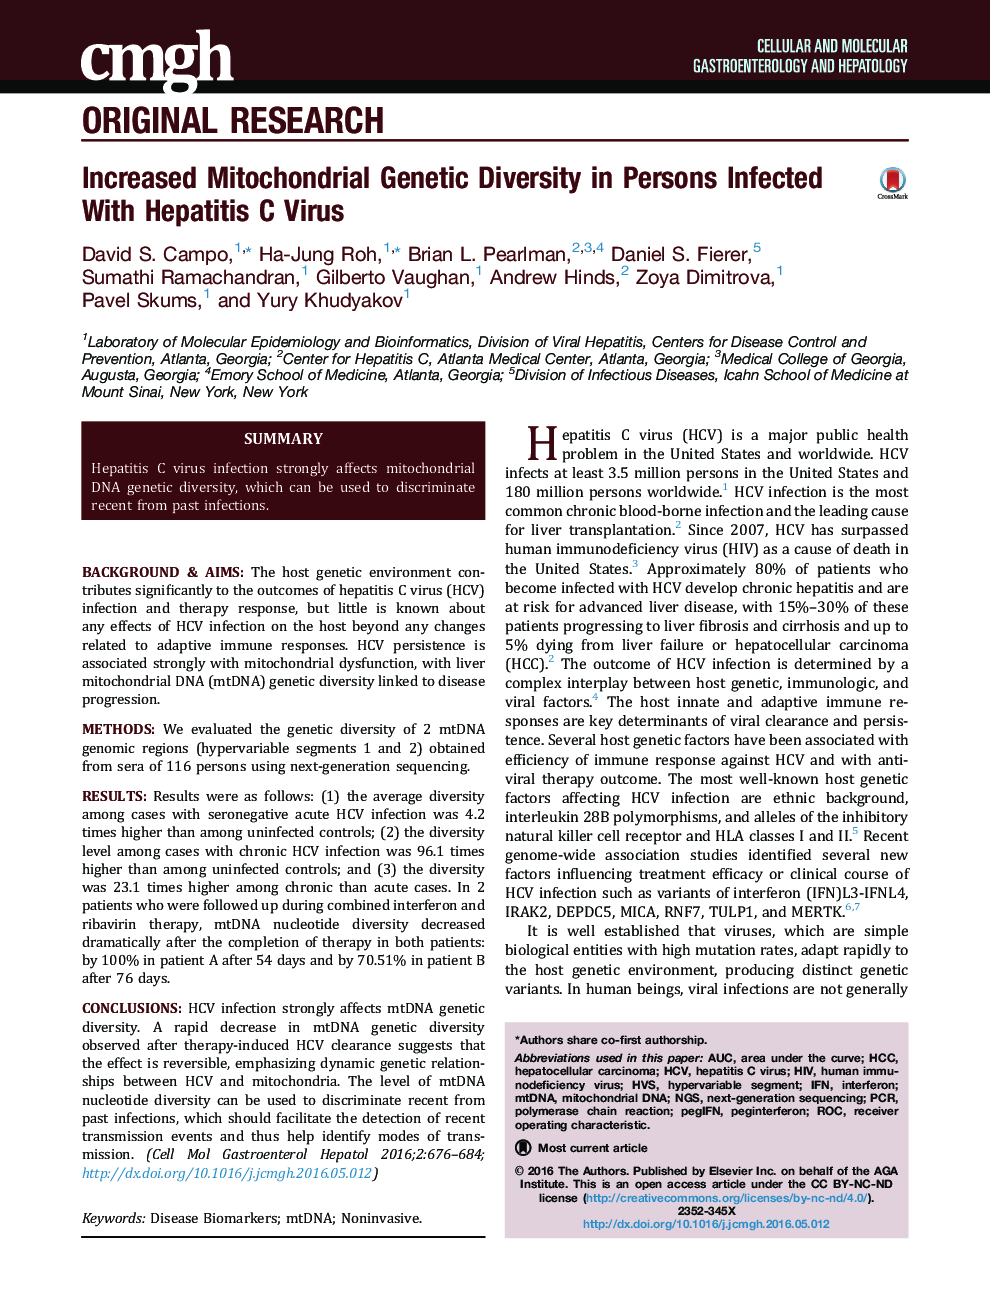 Increased Mitochondrial Genetic Diversity in Persons Infected With Hepatitis C Virus